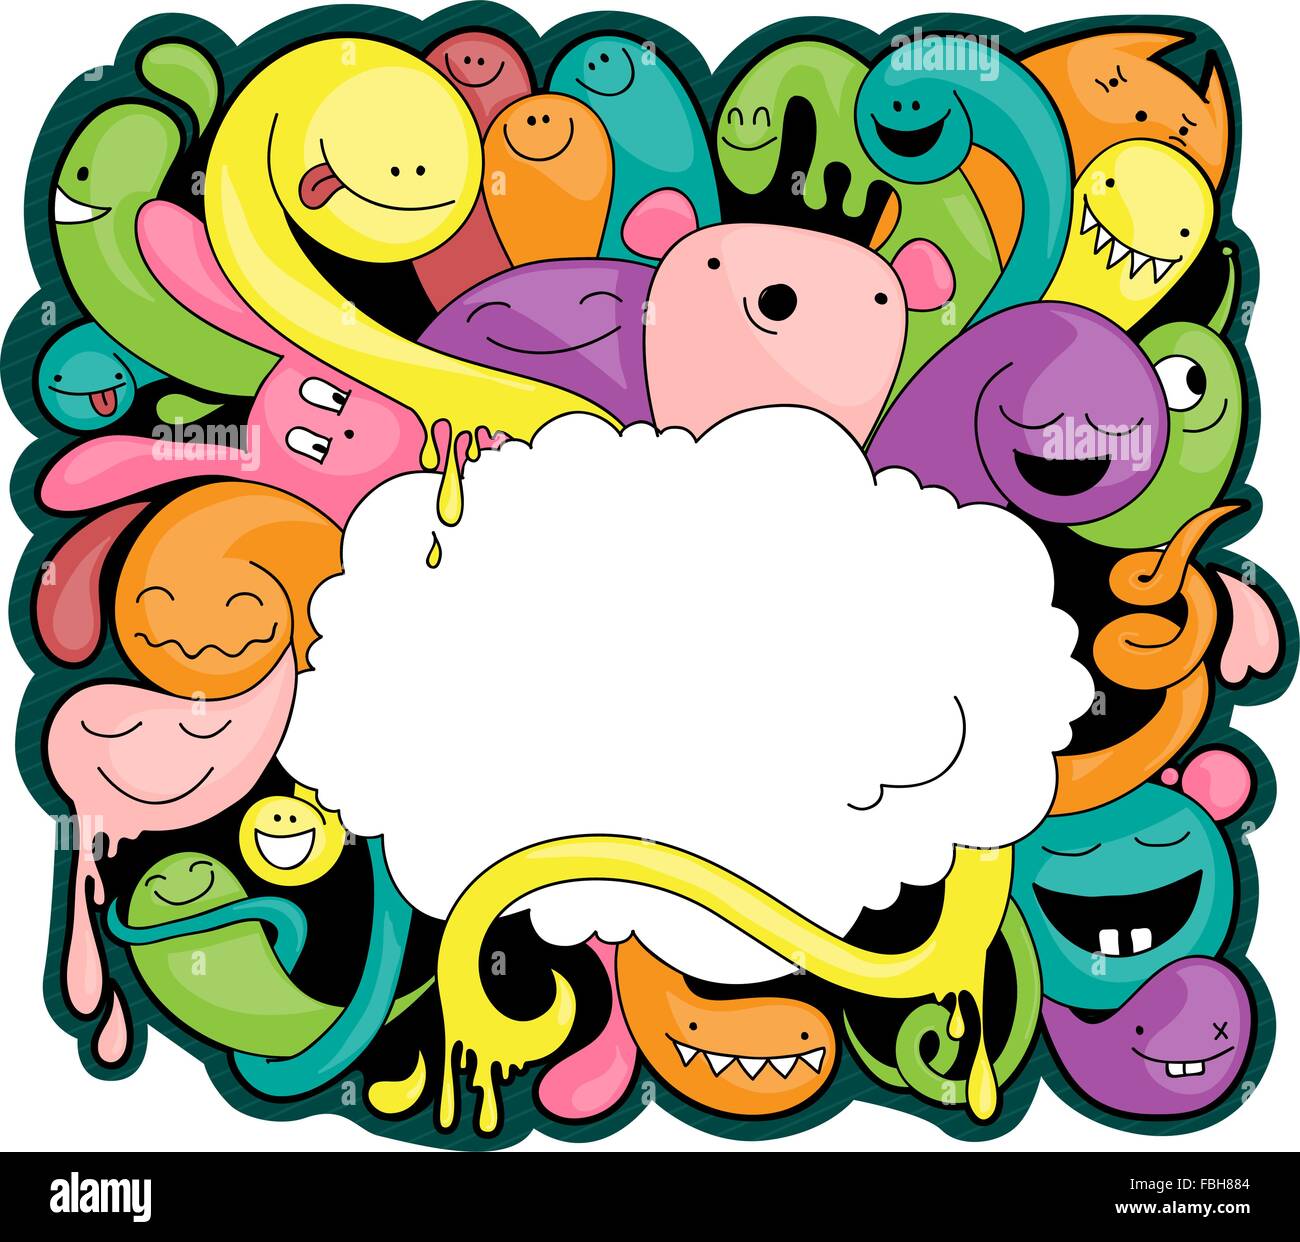 Funny doodle of imaginary creatures. You can place your text in the cloud. Stock Vector